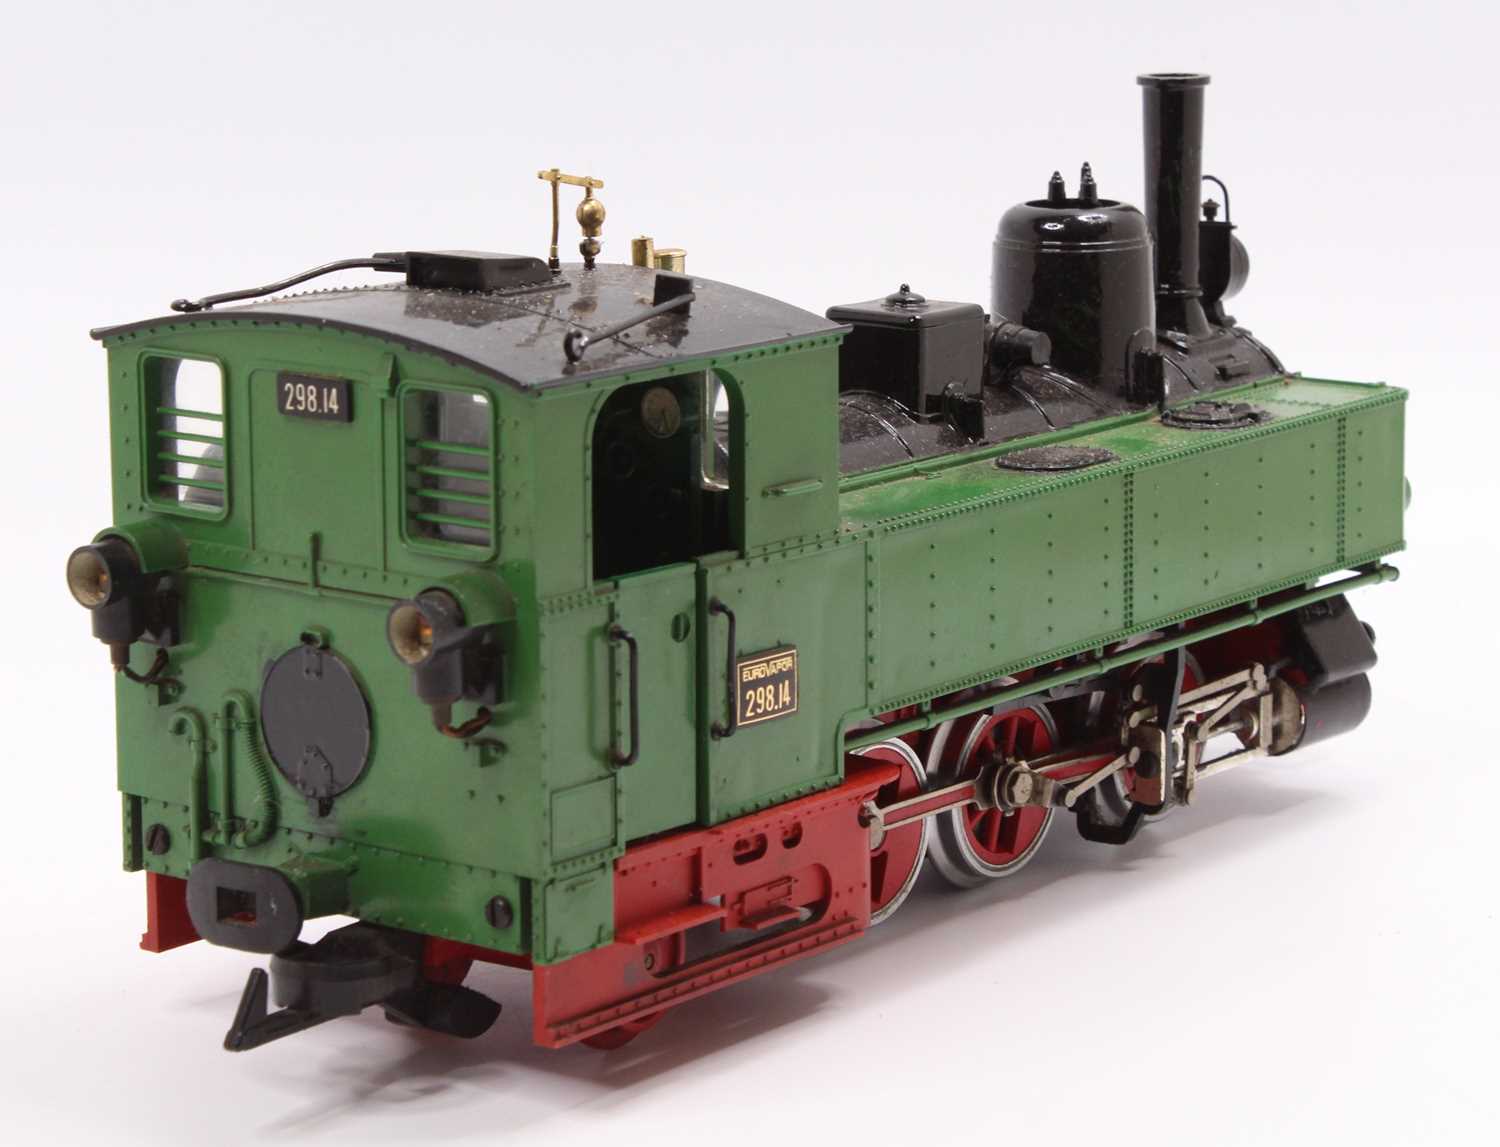 LGB no. 2073 0-6-2 loco running no. 298.14, red chassis green cab, model has been overpainted - Image 5 of 10